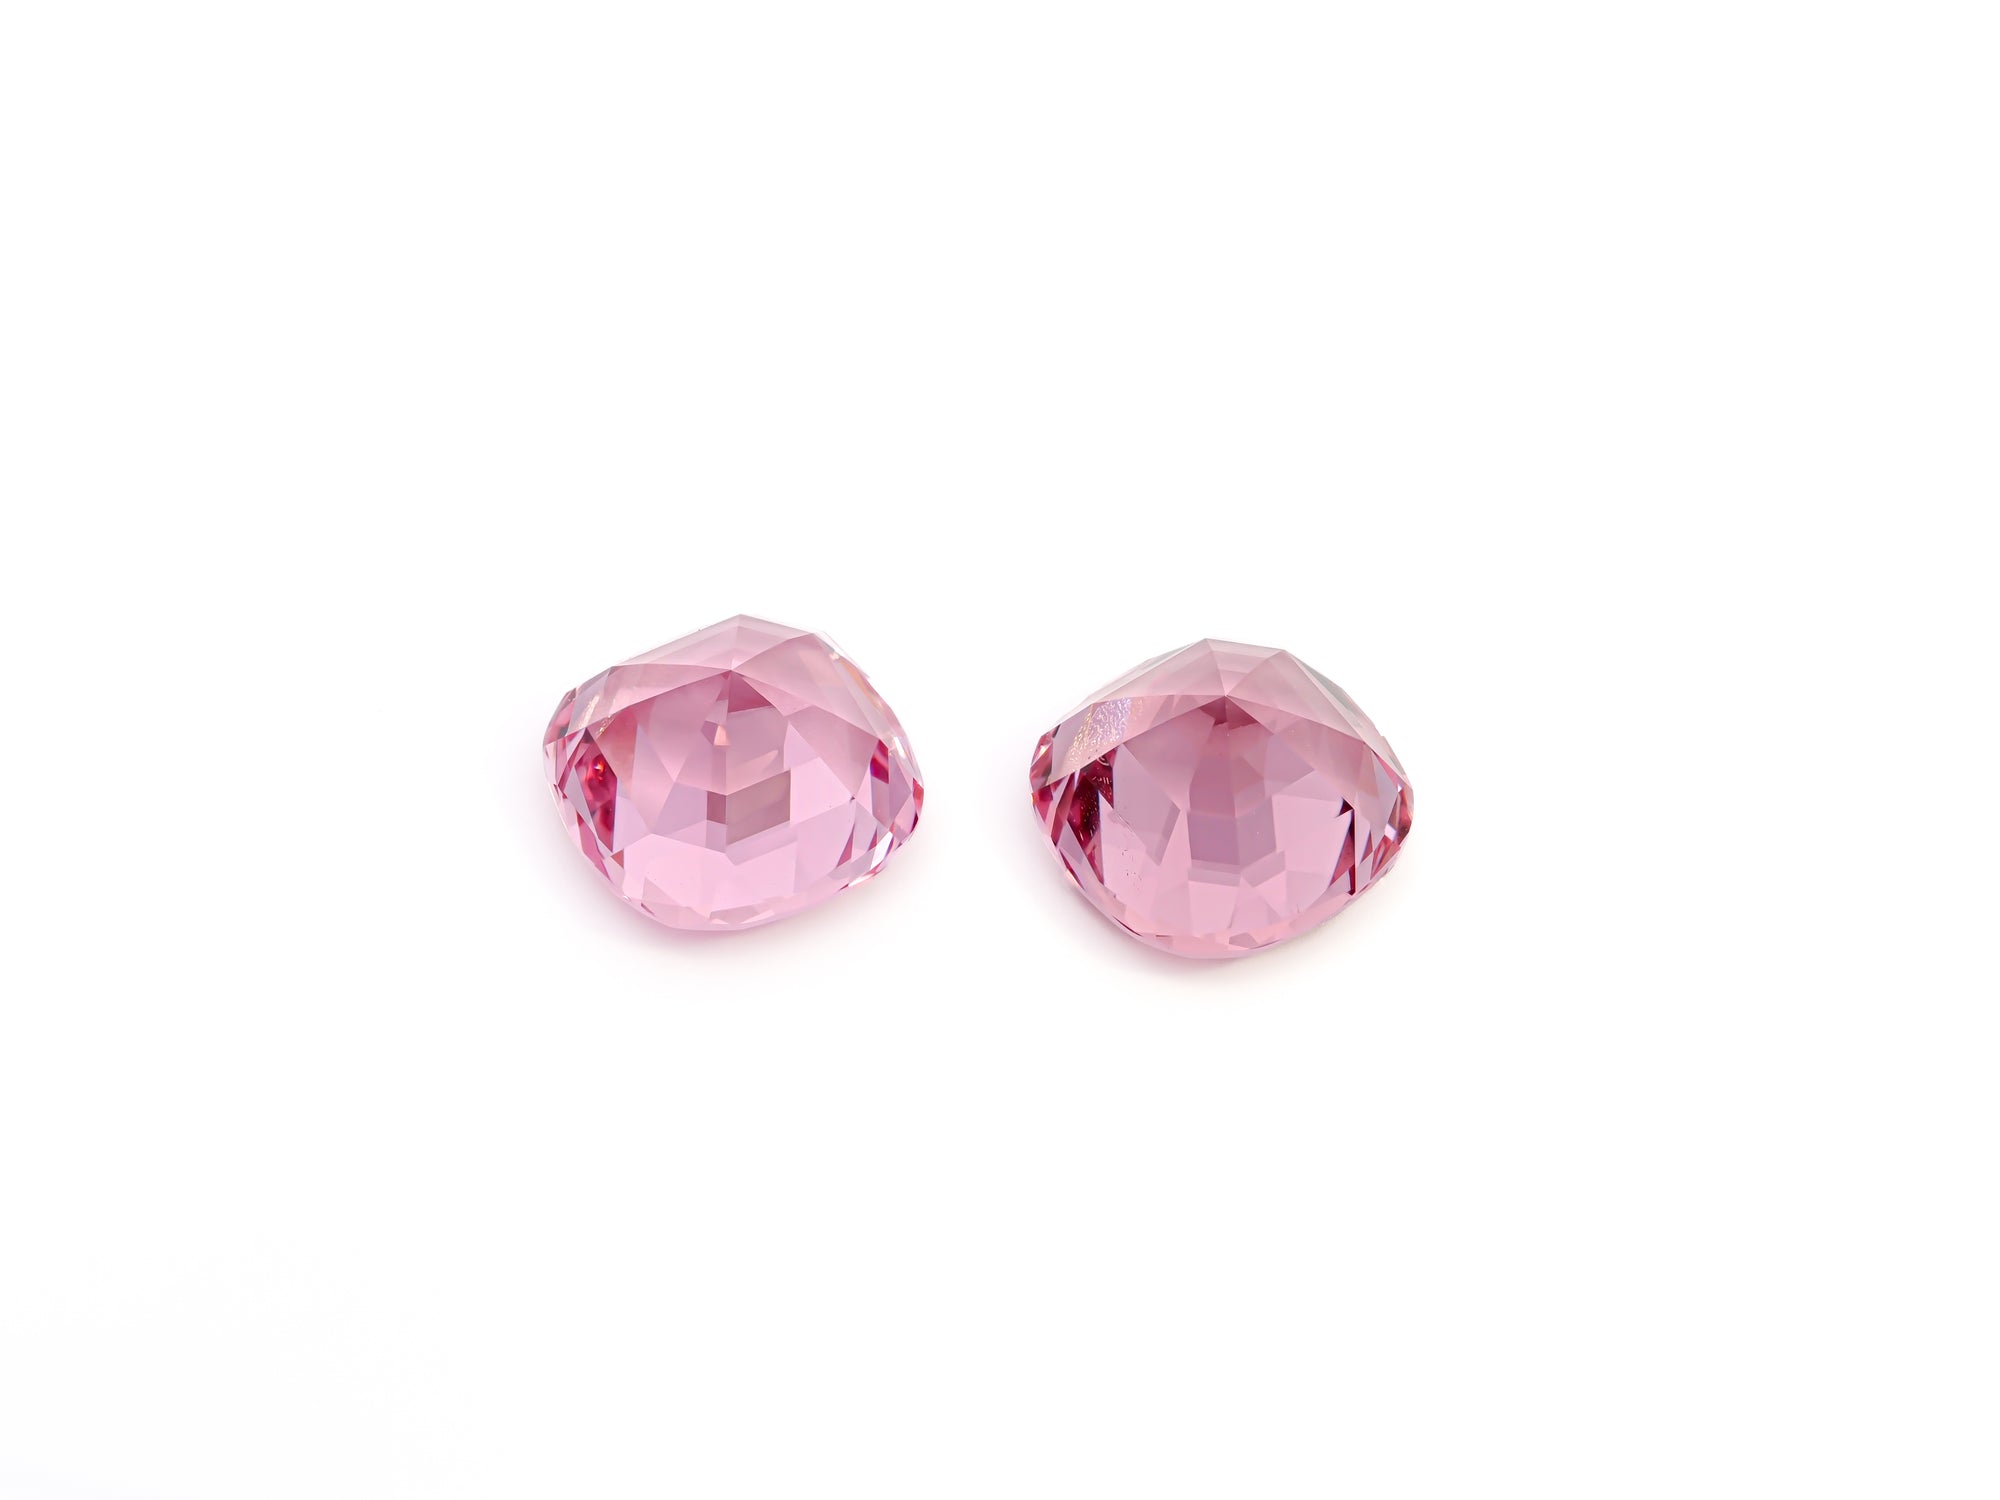 Pink spinel 3.83ct-2